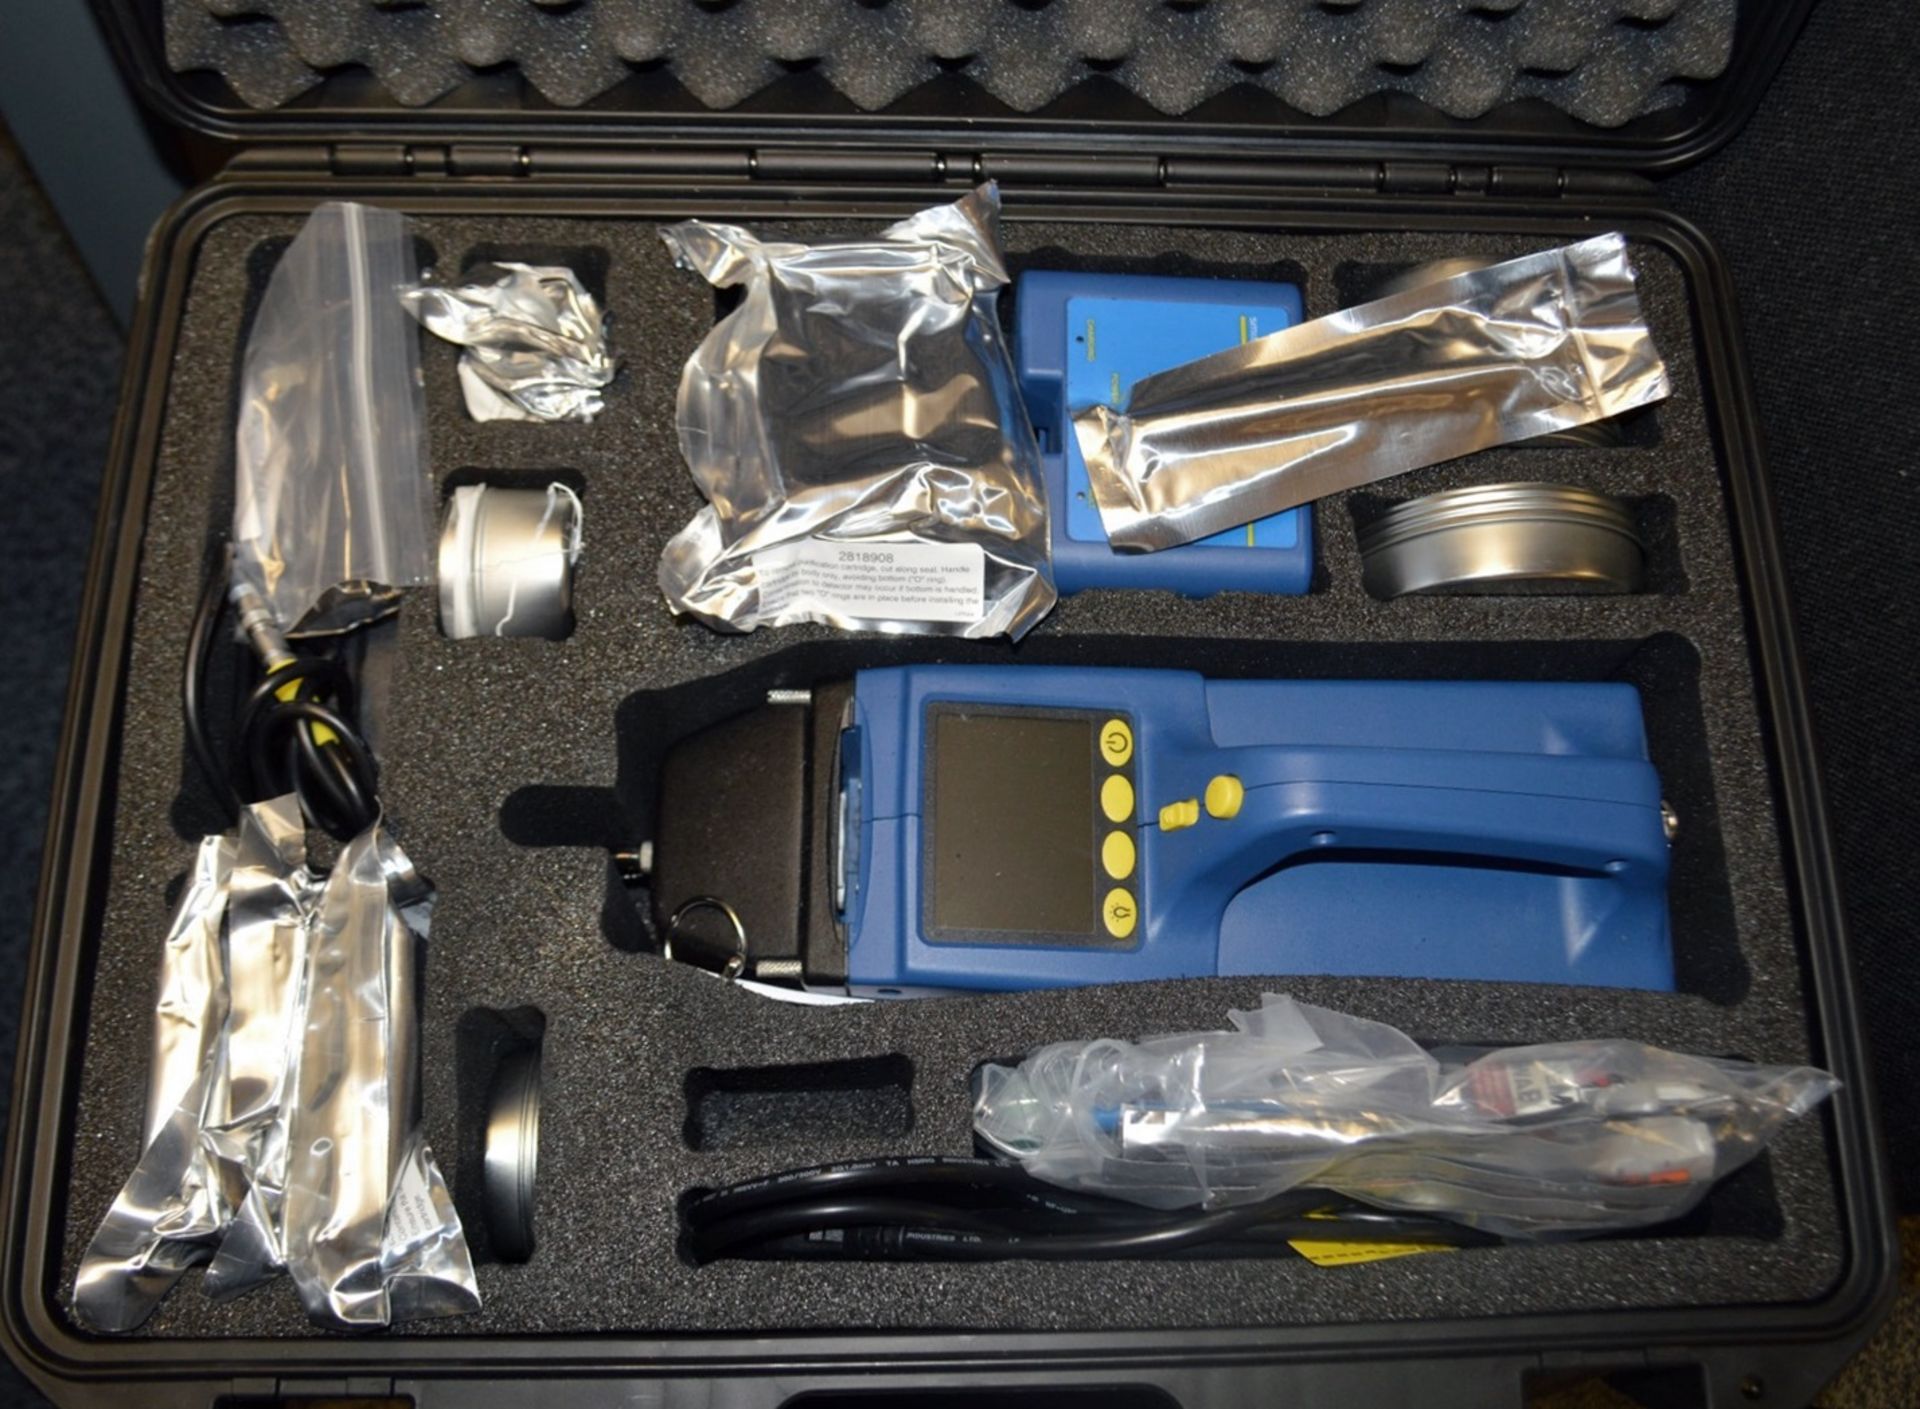 1 x SABRE™ 5000 Handheld Trace Detector - For Explosives, Chemical Agents And Toxic Chemicals - Image 23 of 31